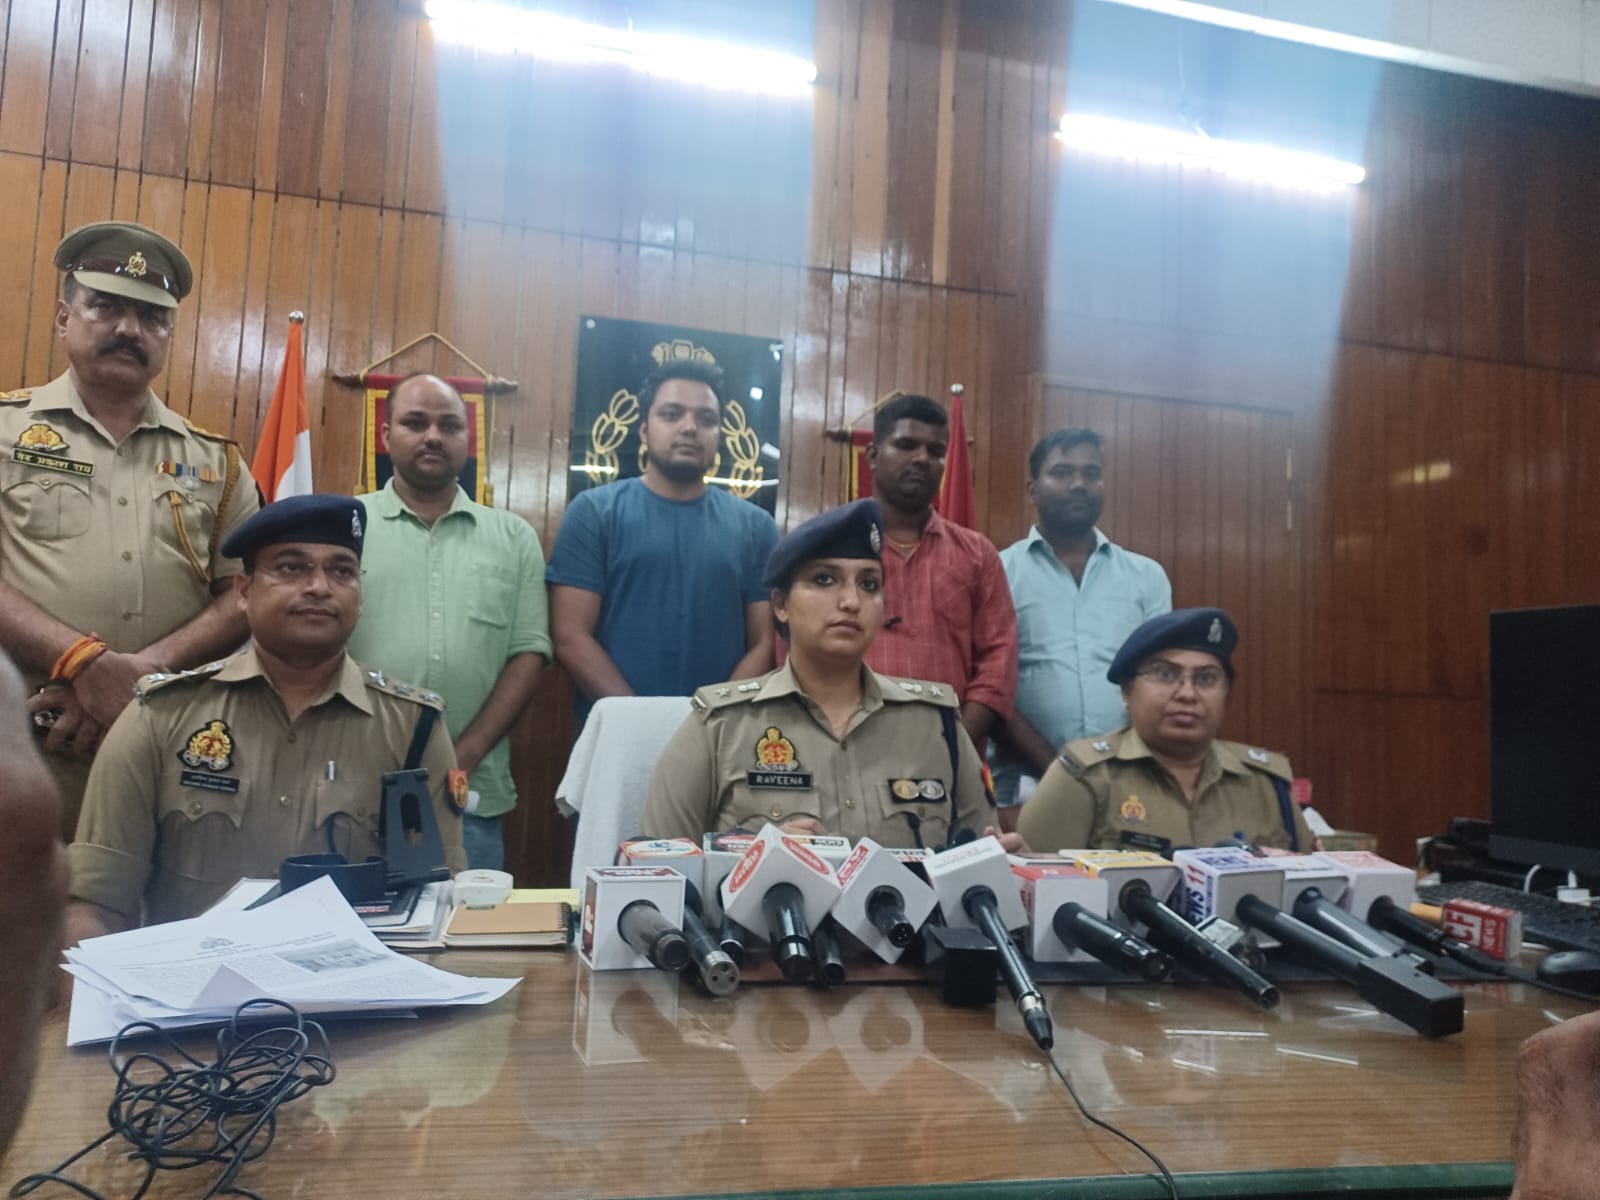 The accused was arrested by Gautampalli police team after recovering stolen goods from his possession